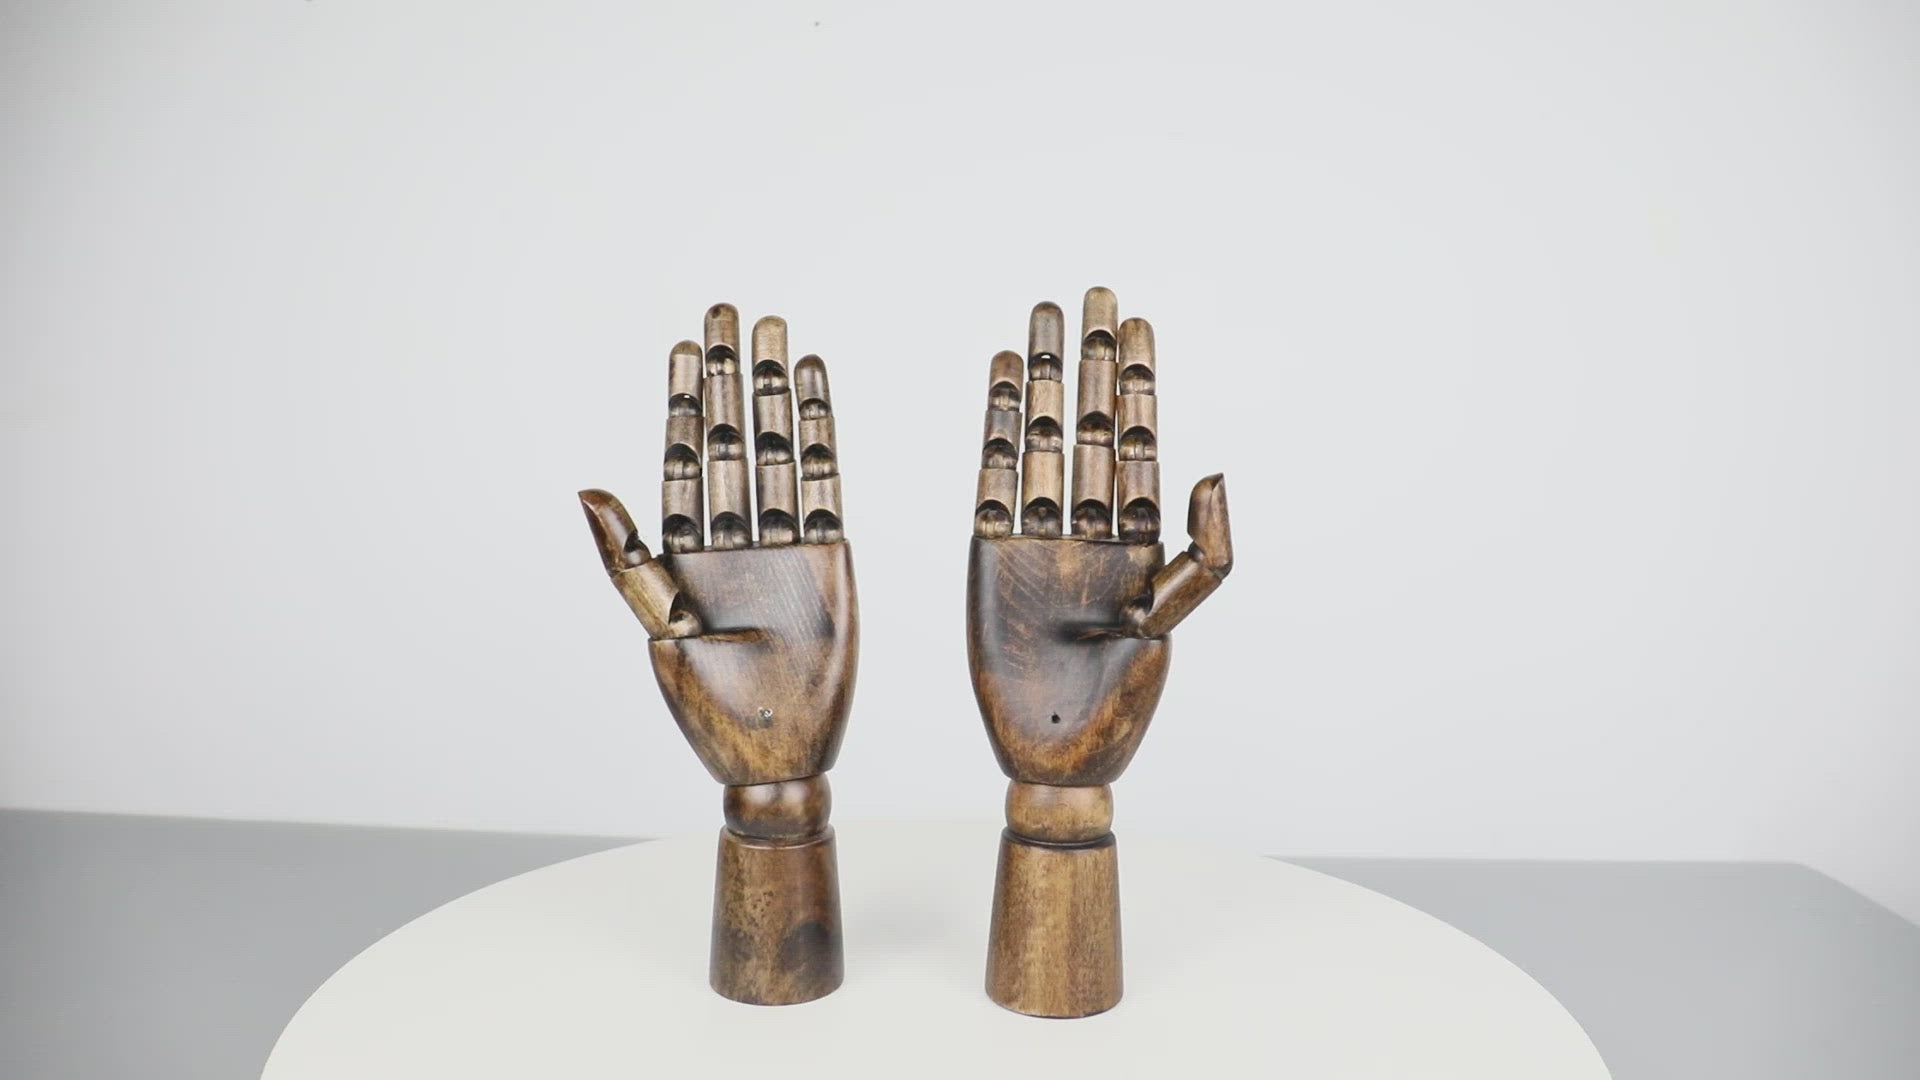 Decorative Arts, Mannequin, Model Hand, Wooden Articulated